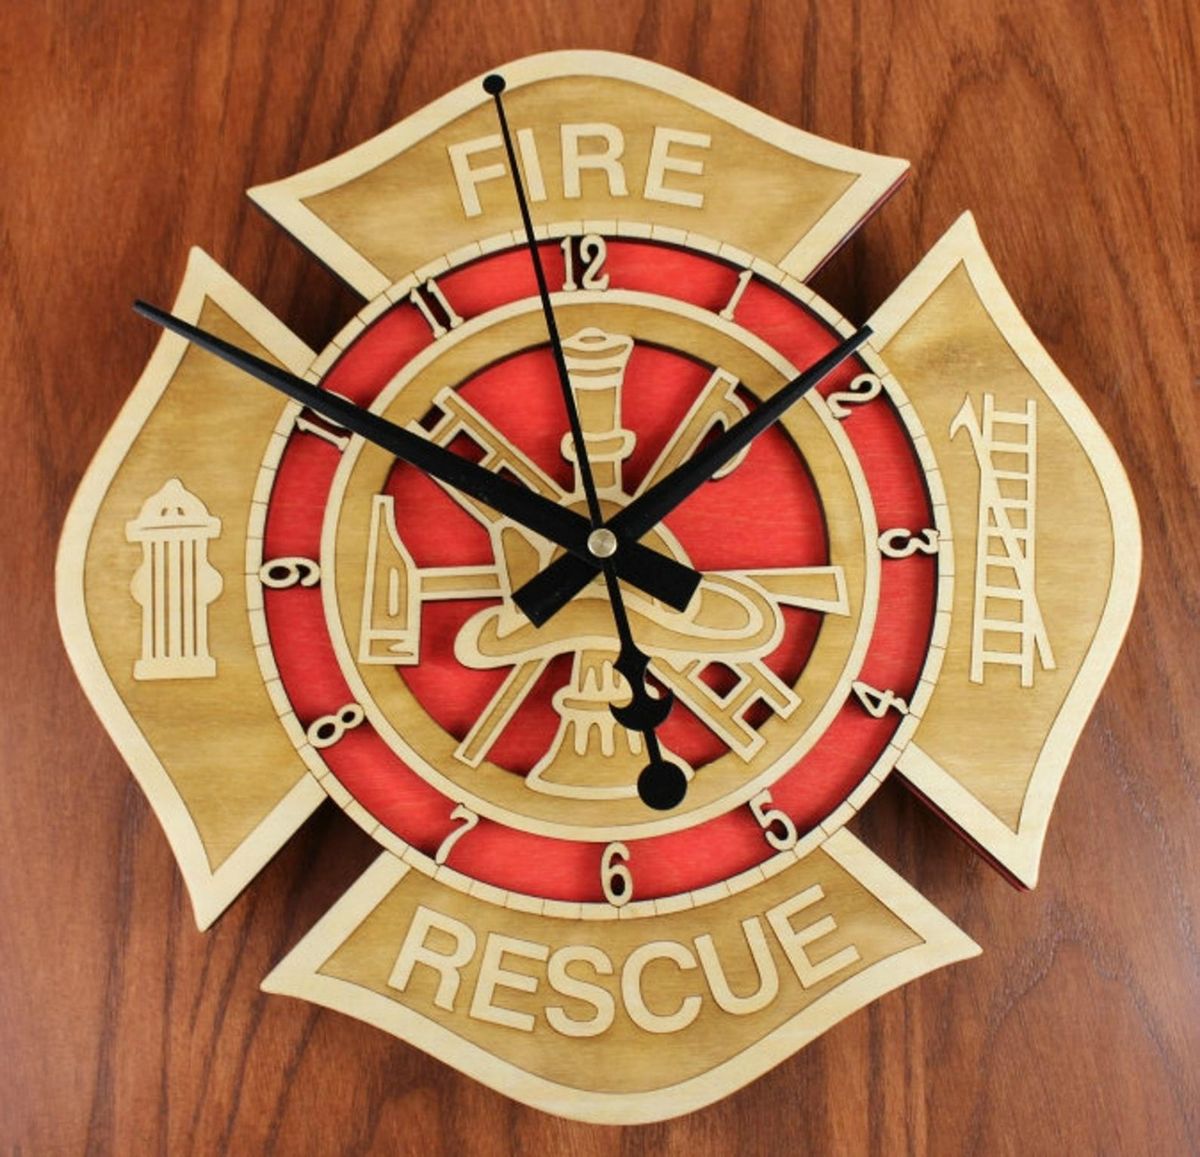 Discover 154+ firefighter gift ideas best